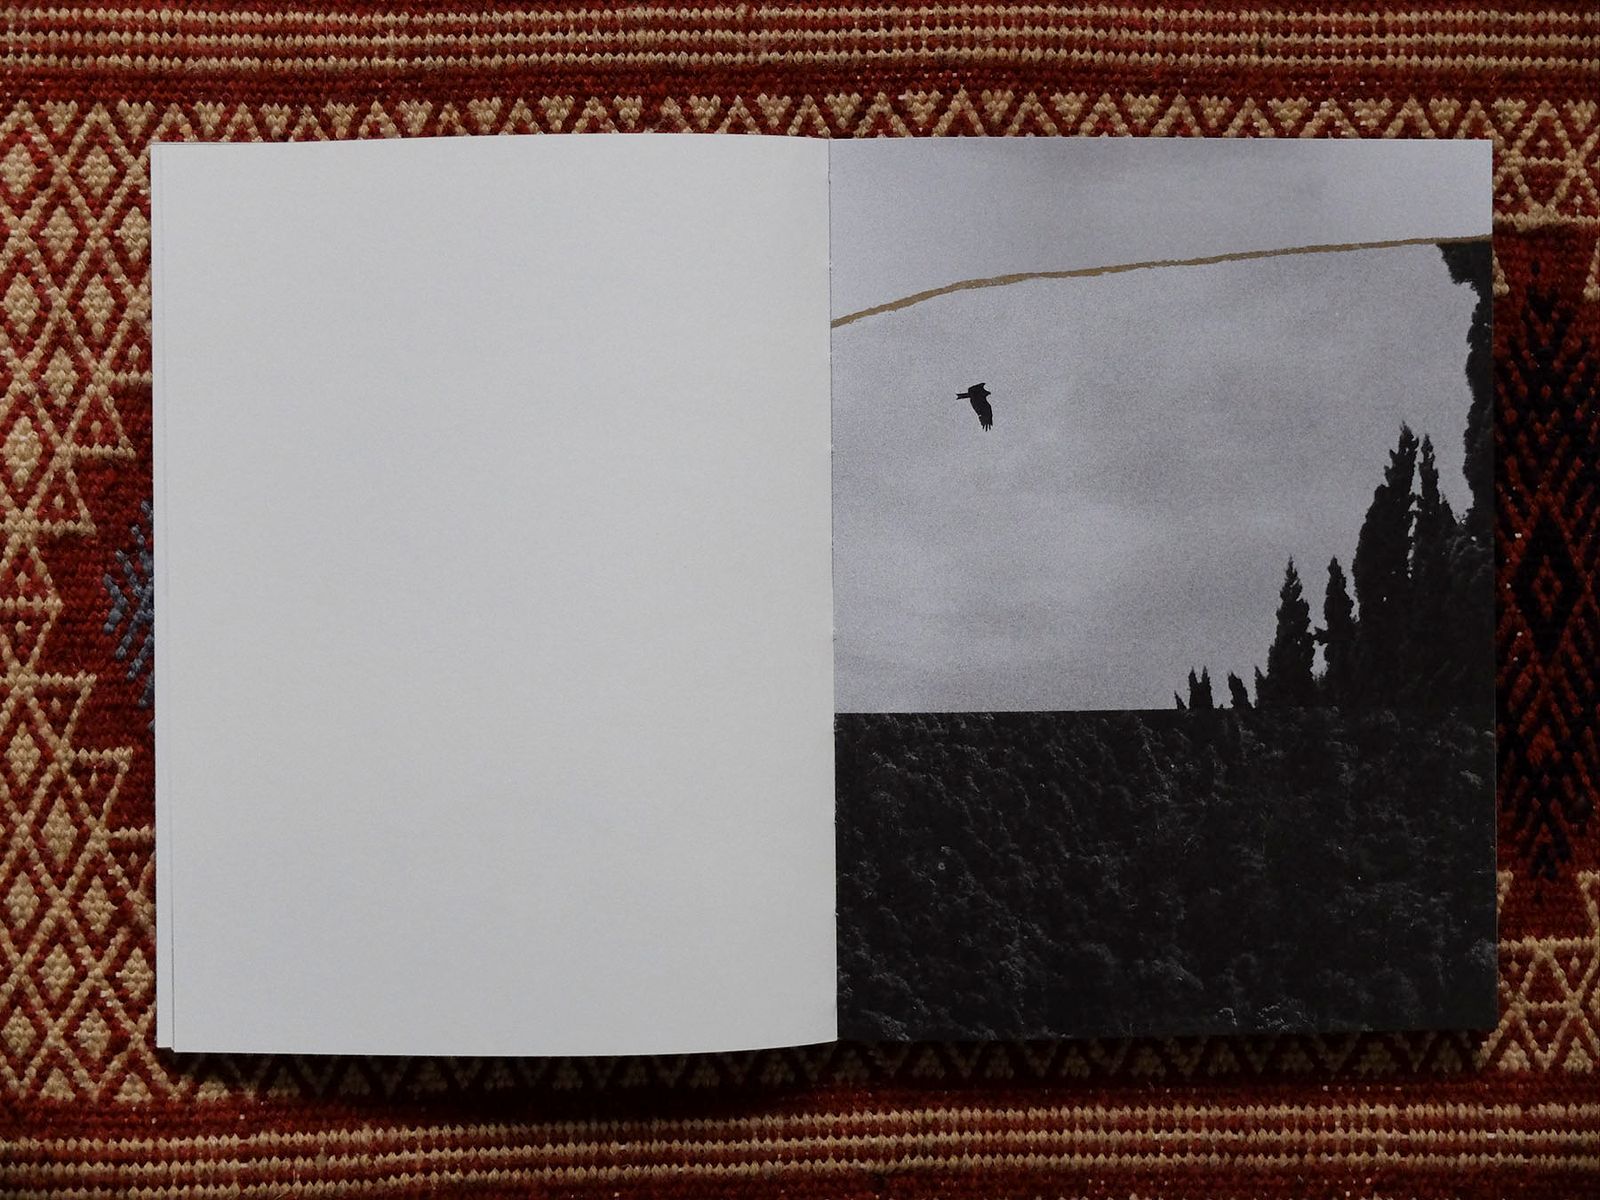 © Leporello Books - Image from the BORDERS OF NOTHINGNESS – ON THE MEND by Margaret Lansink photography project